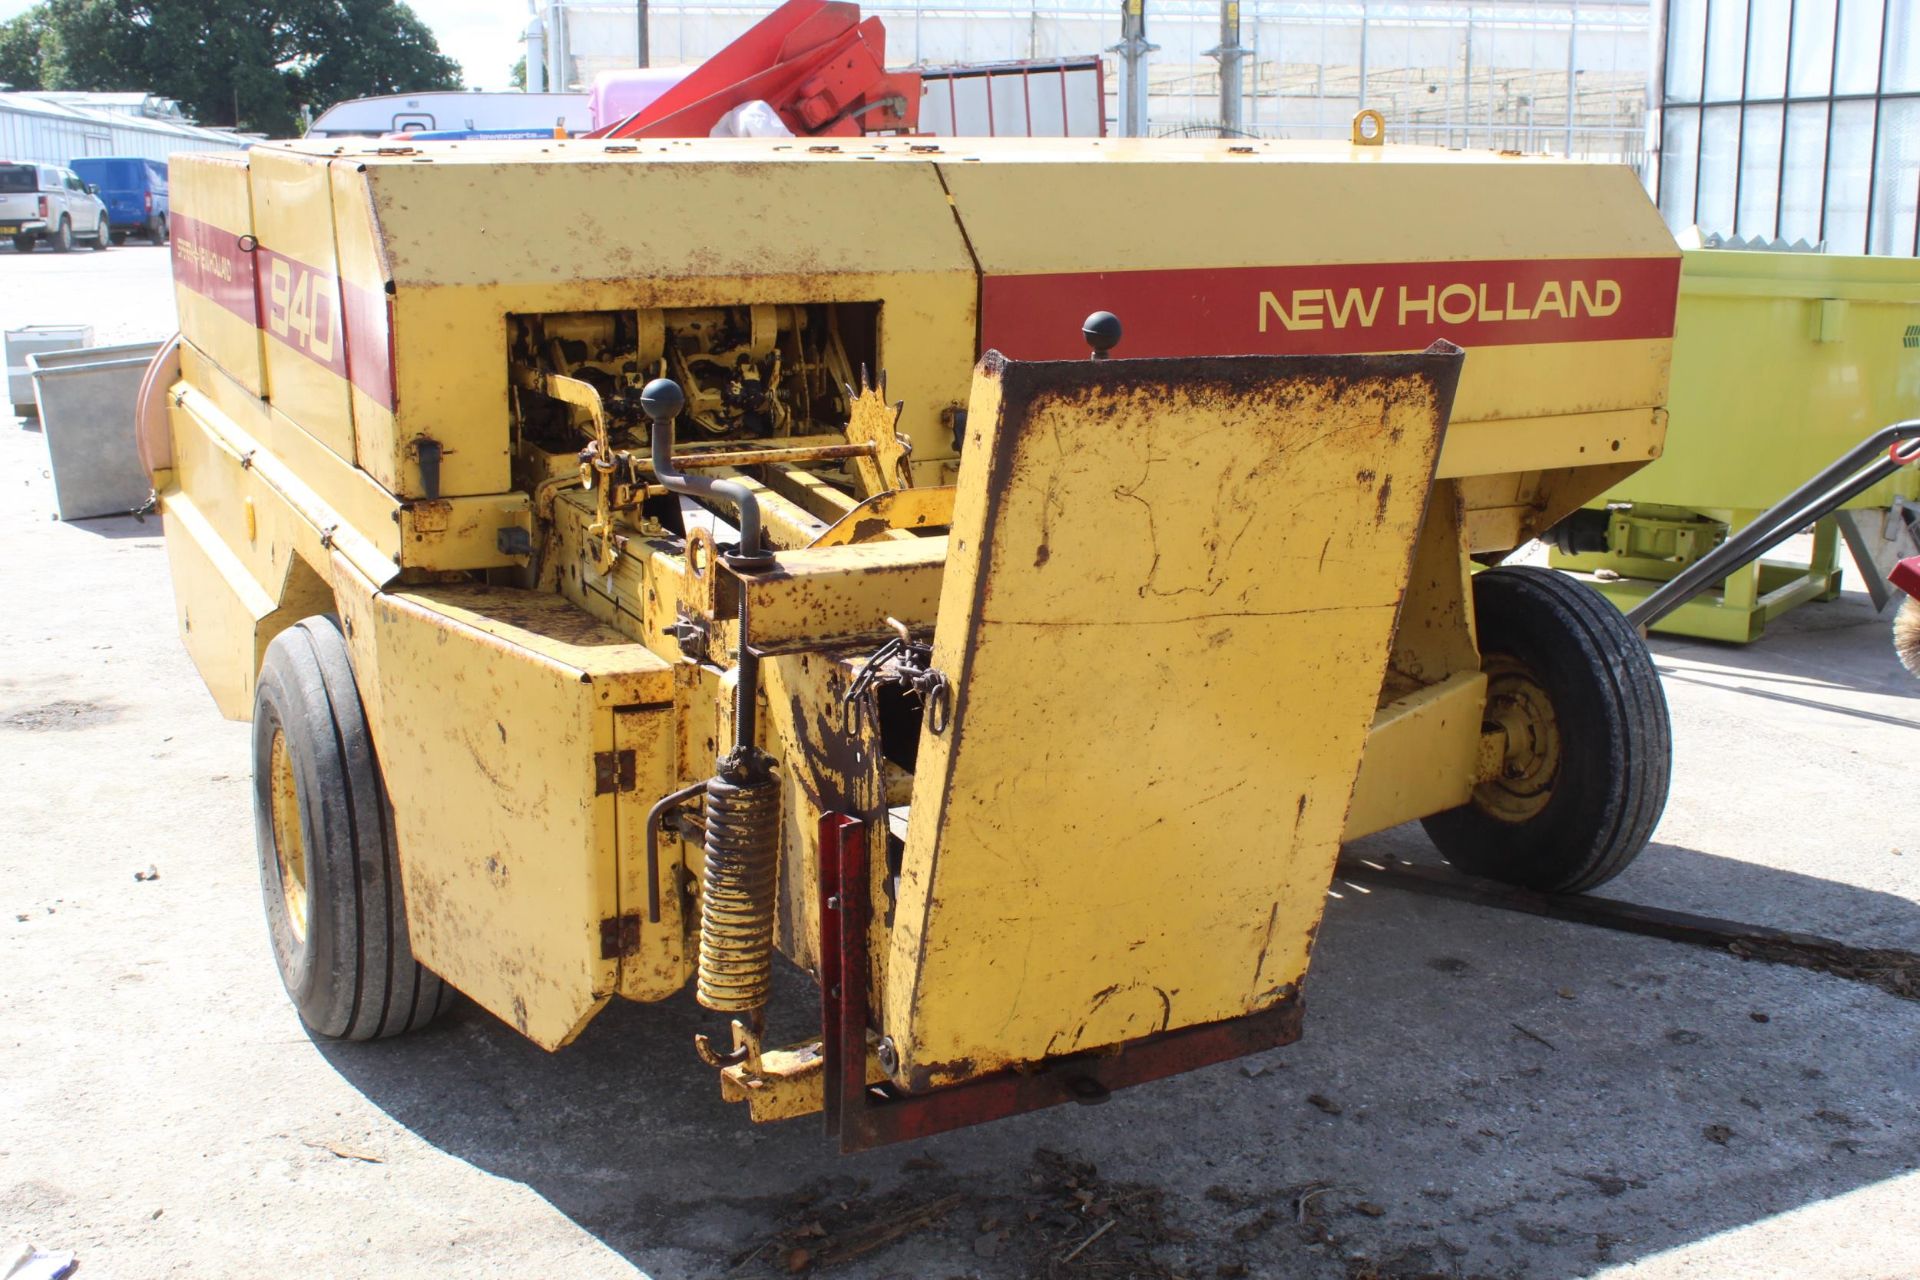 A NEW HOLLAND 940 CONVENTIONAL BALER WITH PTO SHAFT IN THE OFFICE NO VAT - Image 3 of 3